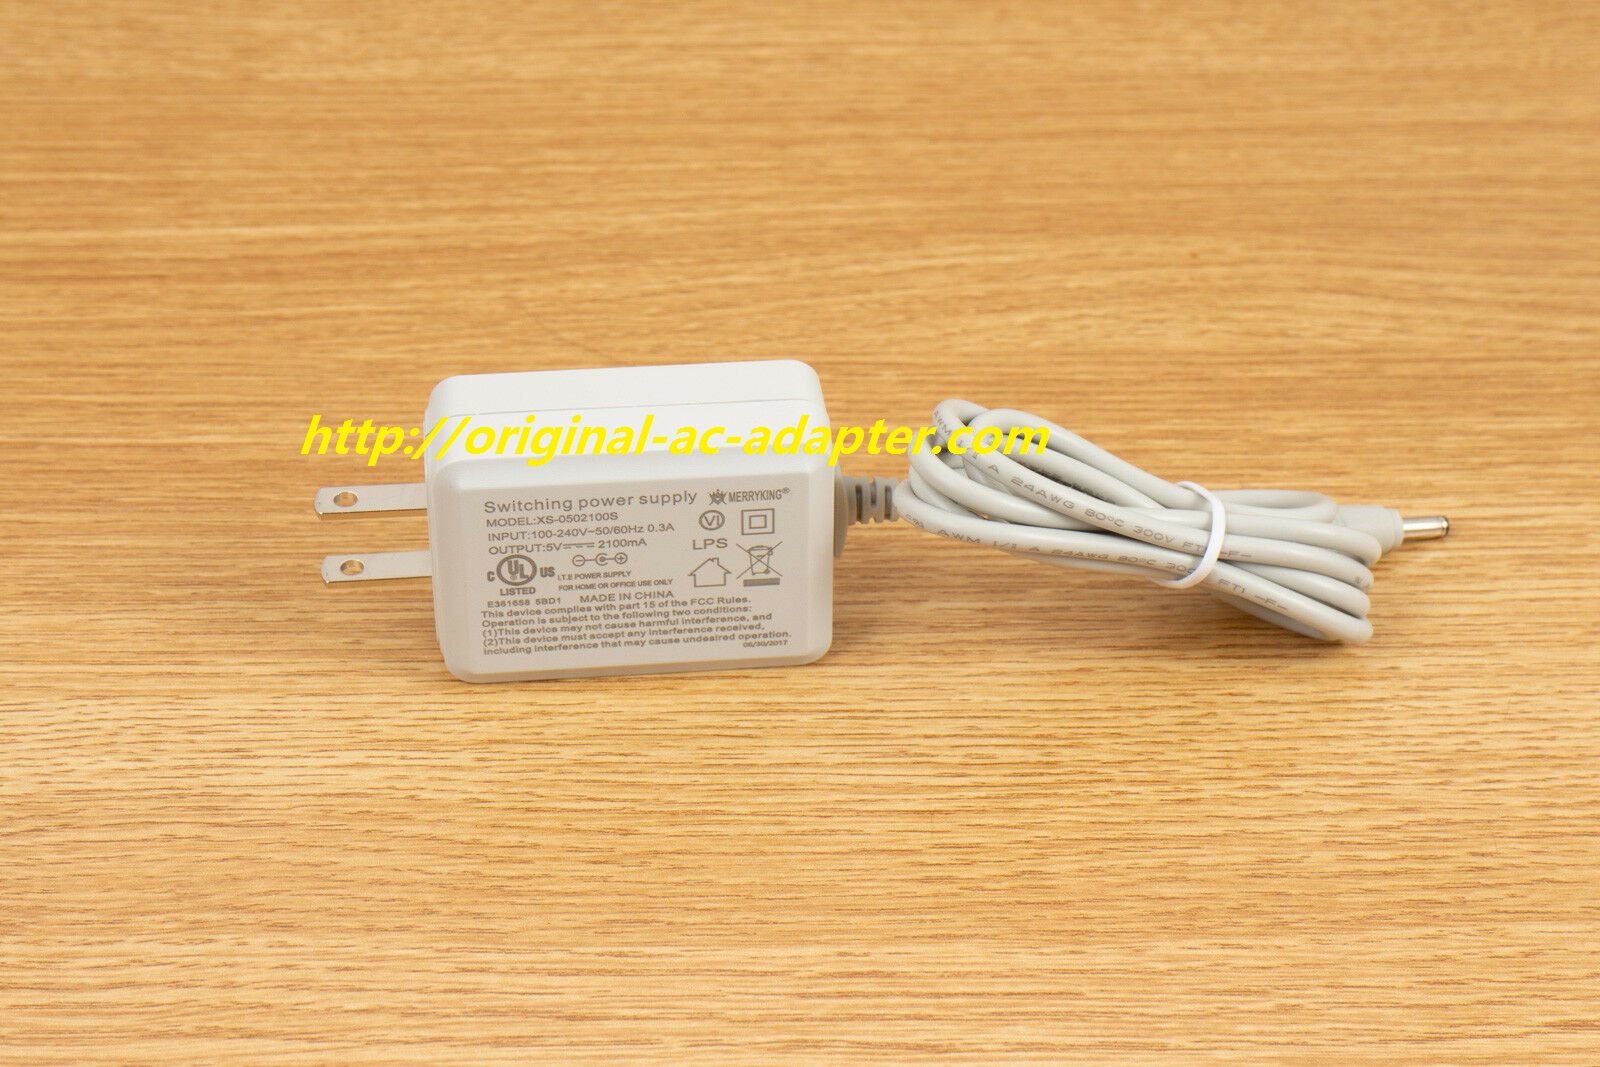 Brand NEW MerryKing 5V 2100mA XS-0502100S AC Adapter POWER SUPPLY